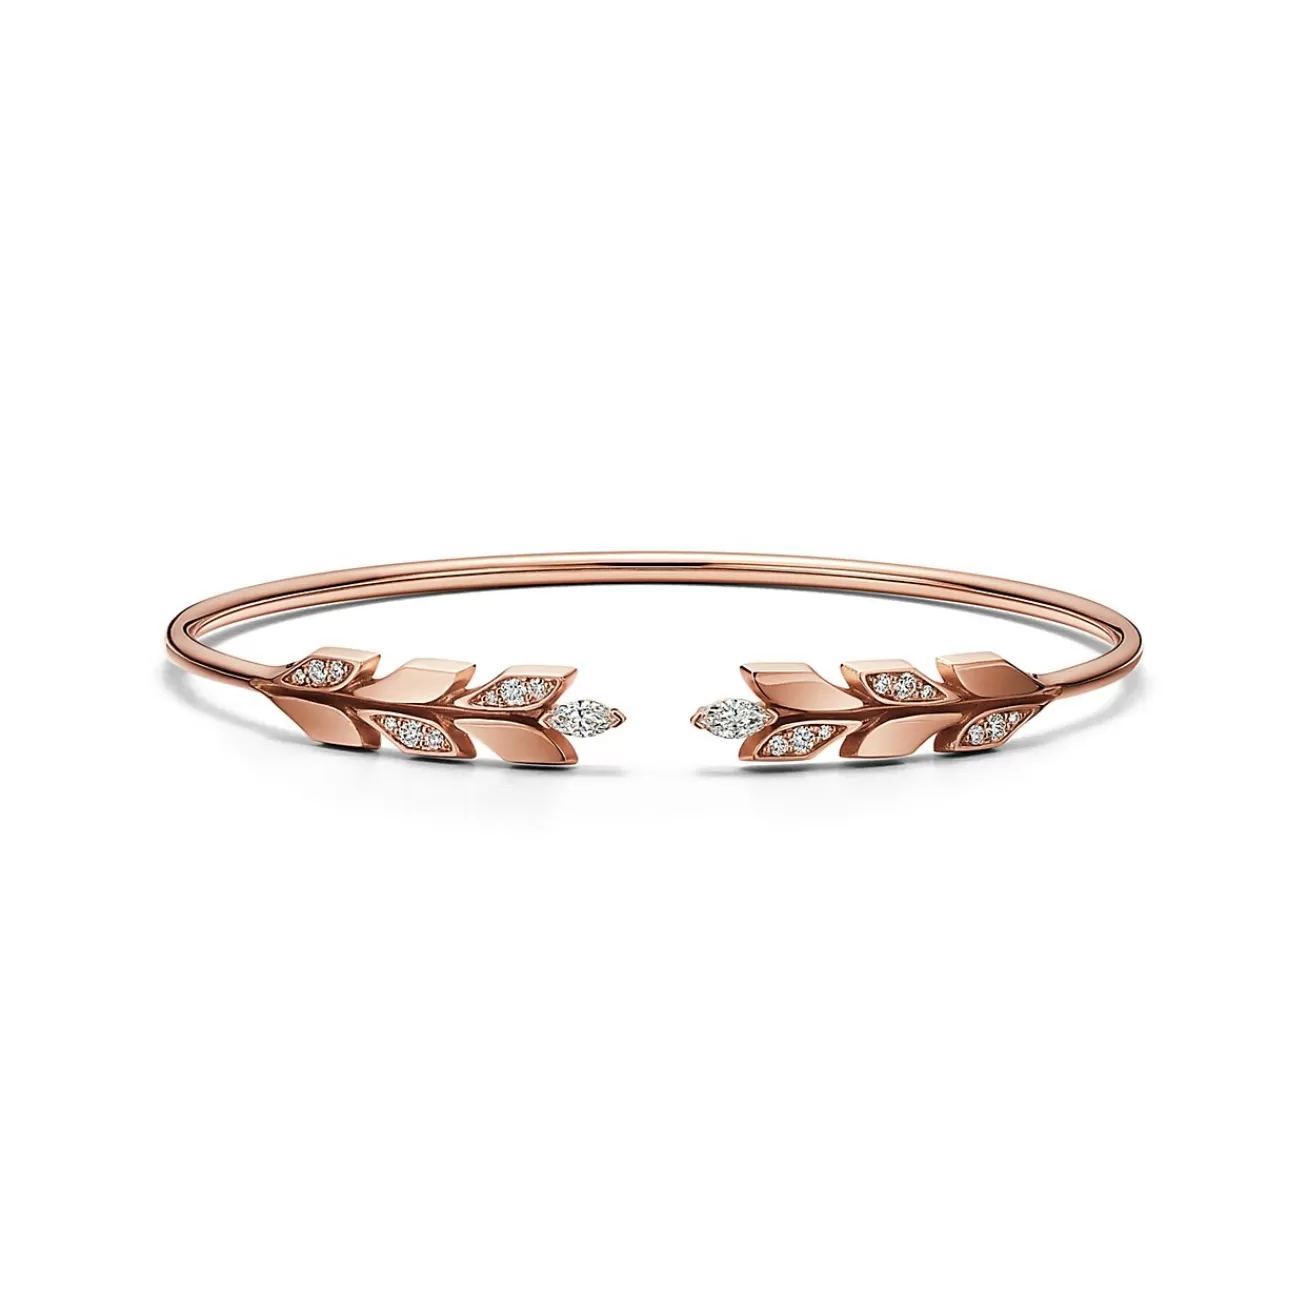 Tiffany & Co. Tiffany Victoria® Vine Wire Bracelet in Rose Gold with Diamonds | ^ Bracelets | Gifts for Her